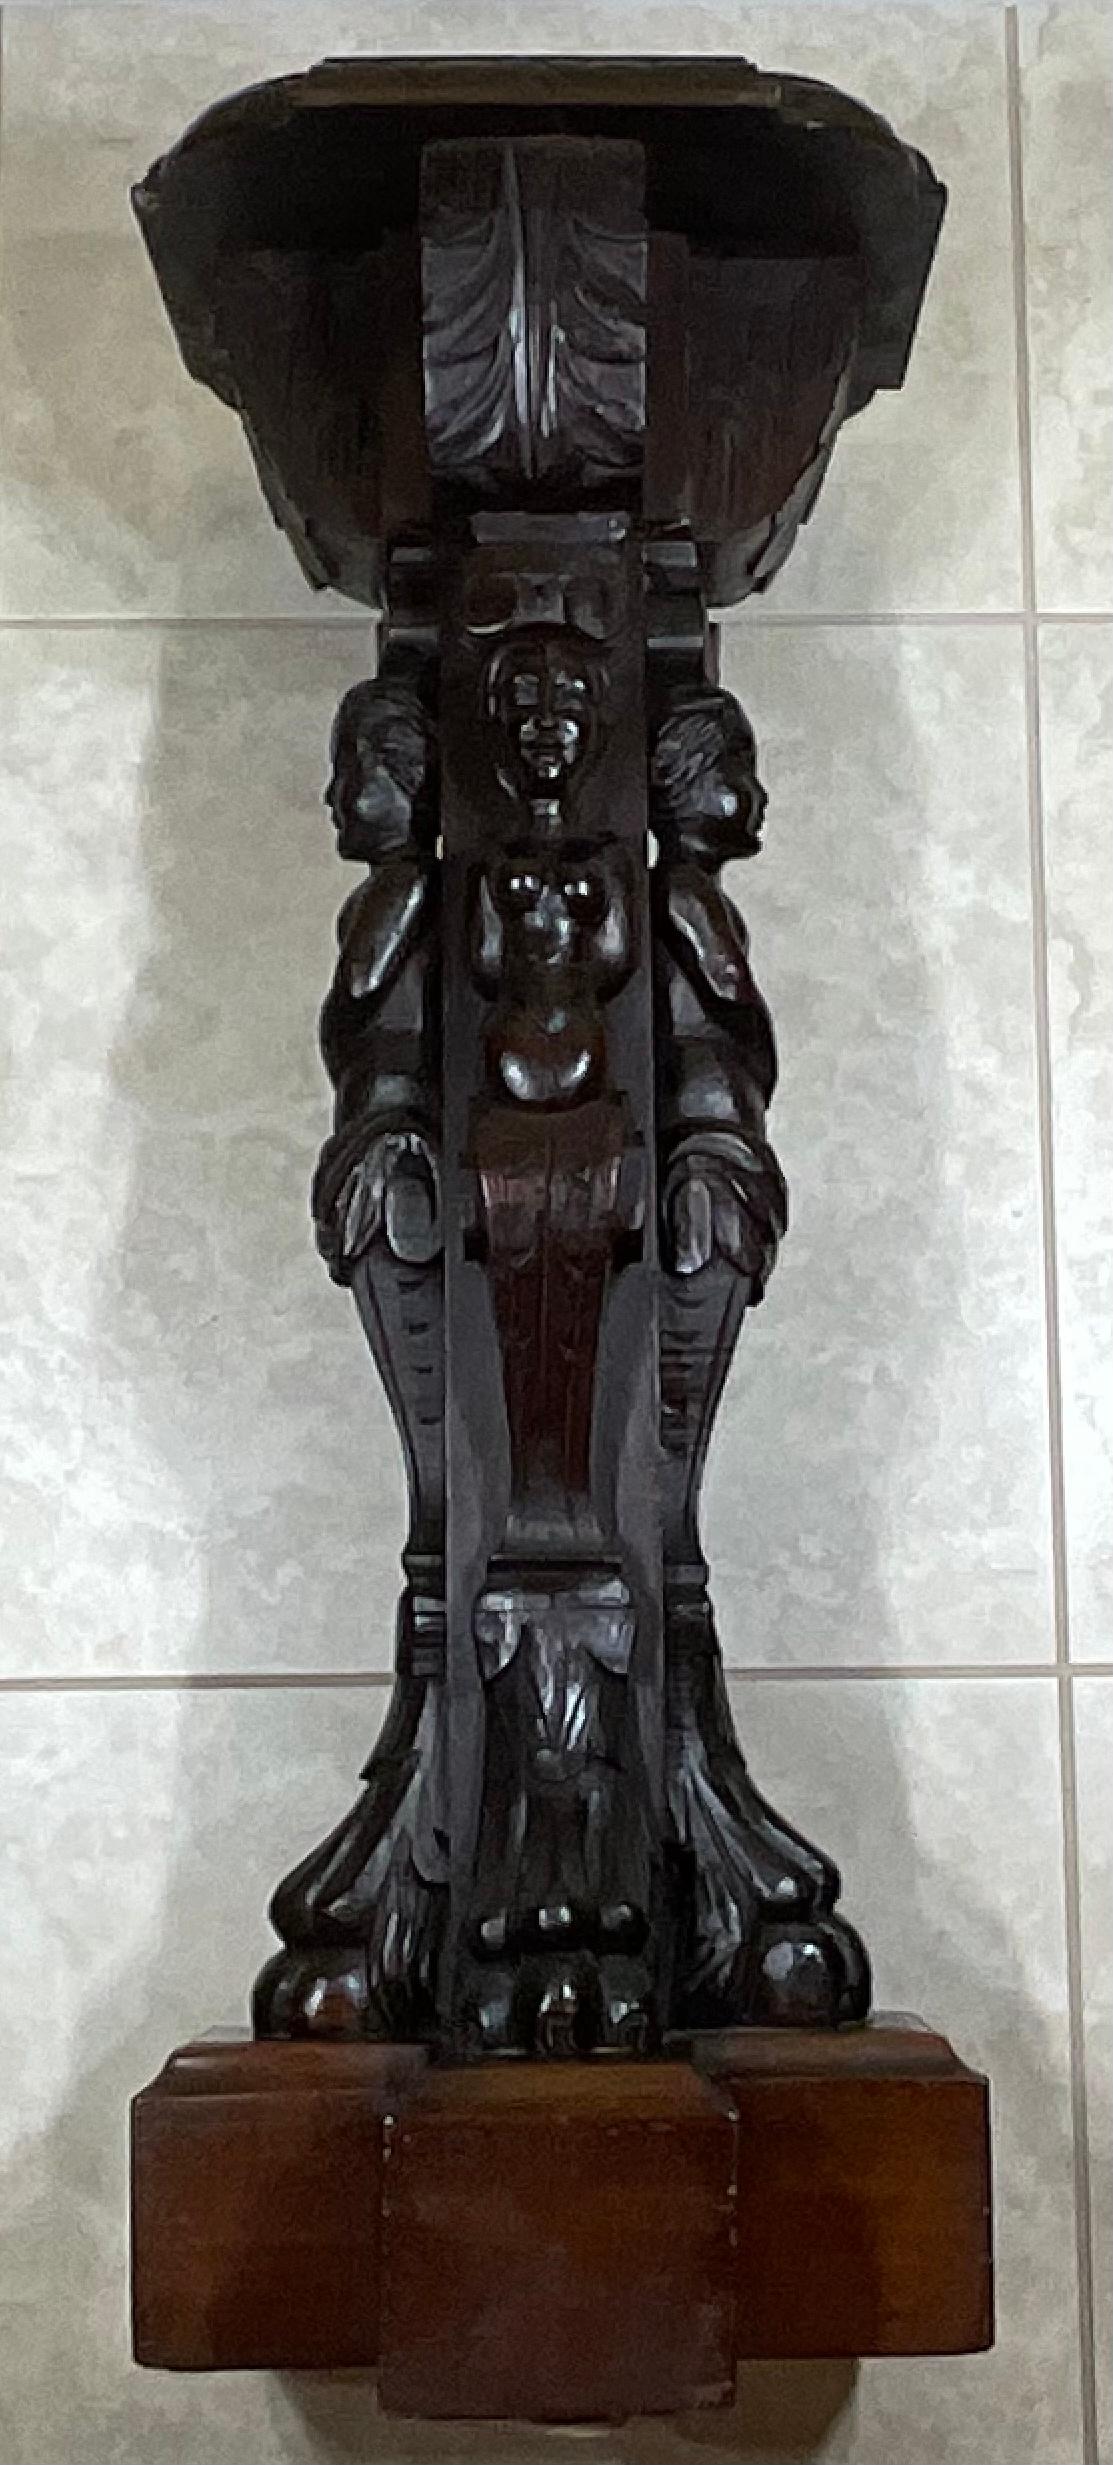 Elegant pedestal made of carved walnut wood with intriguing four figures of woman. Intricate and vivid carving with many details will make this pedestal as obj of art by itself.